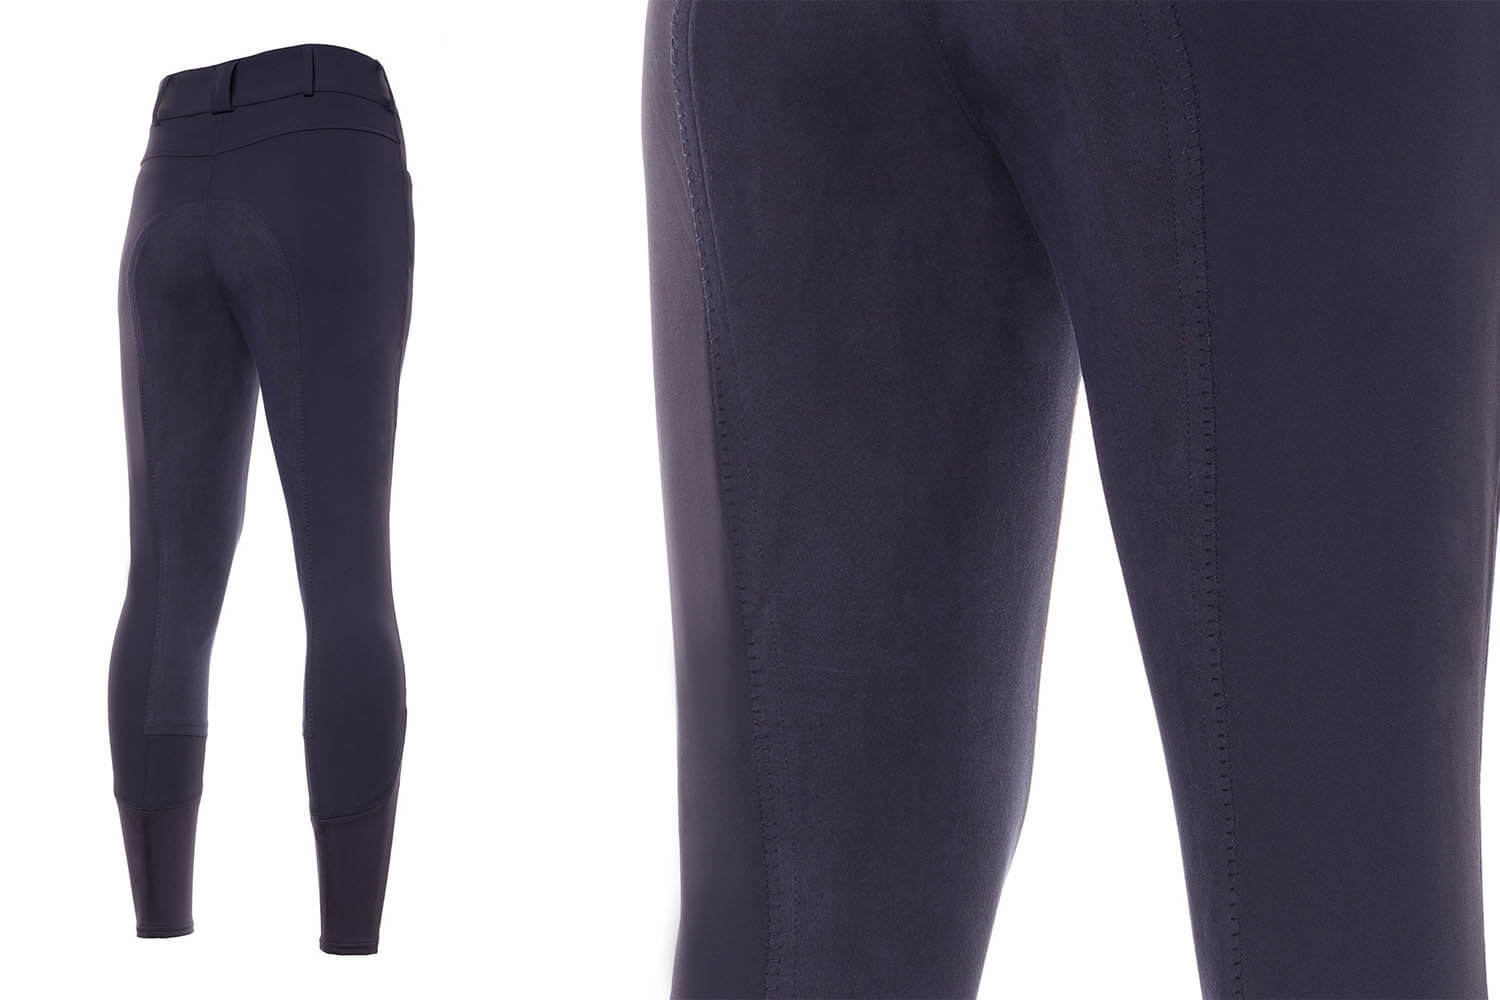 Women's, navy Pikeur breeches with full seat leather grip